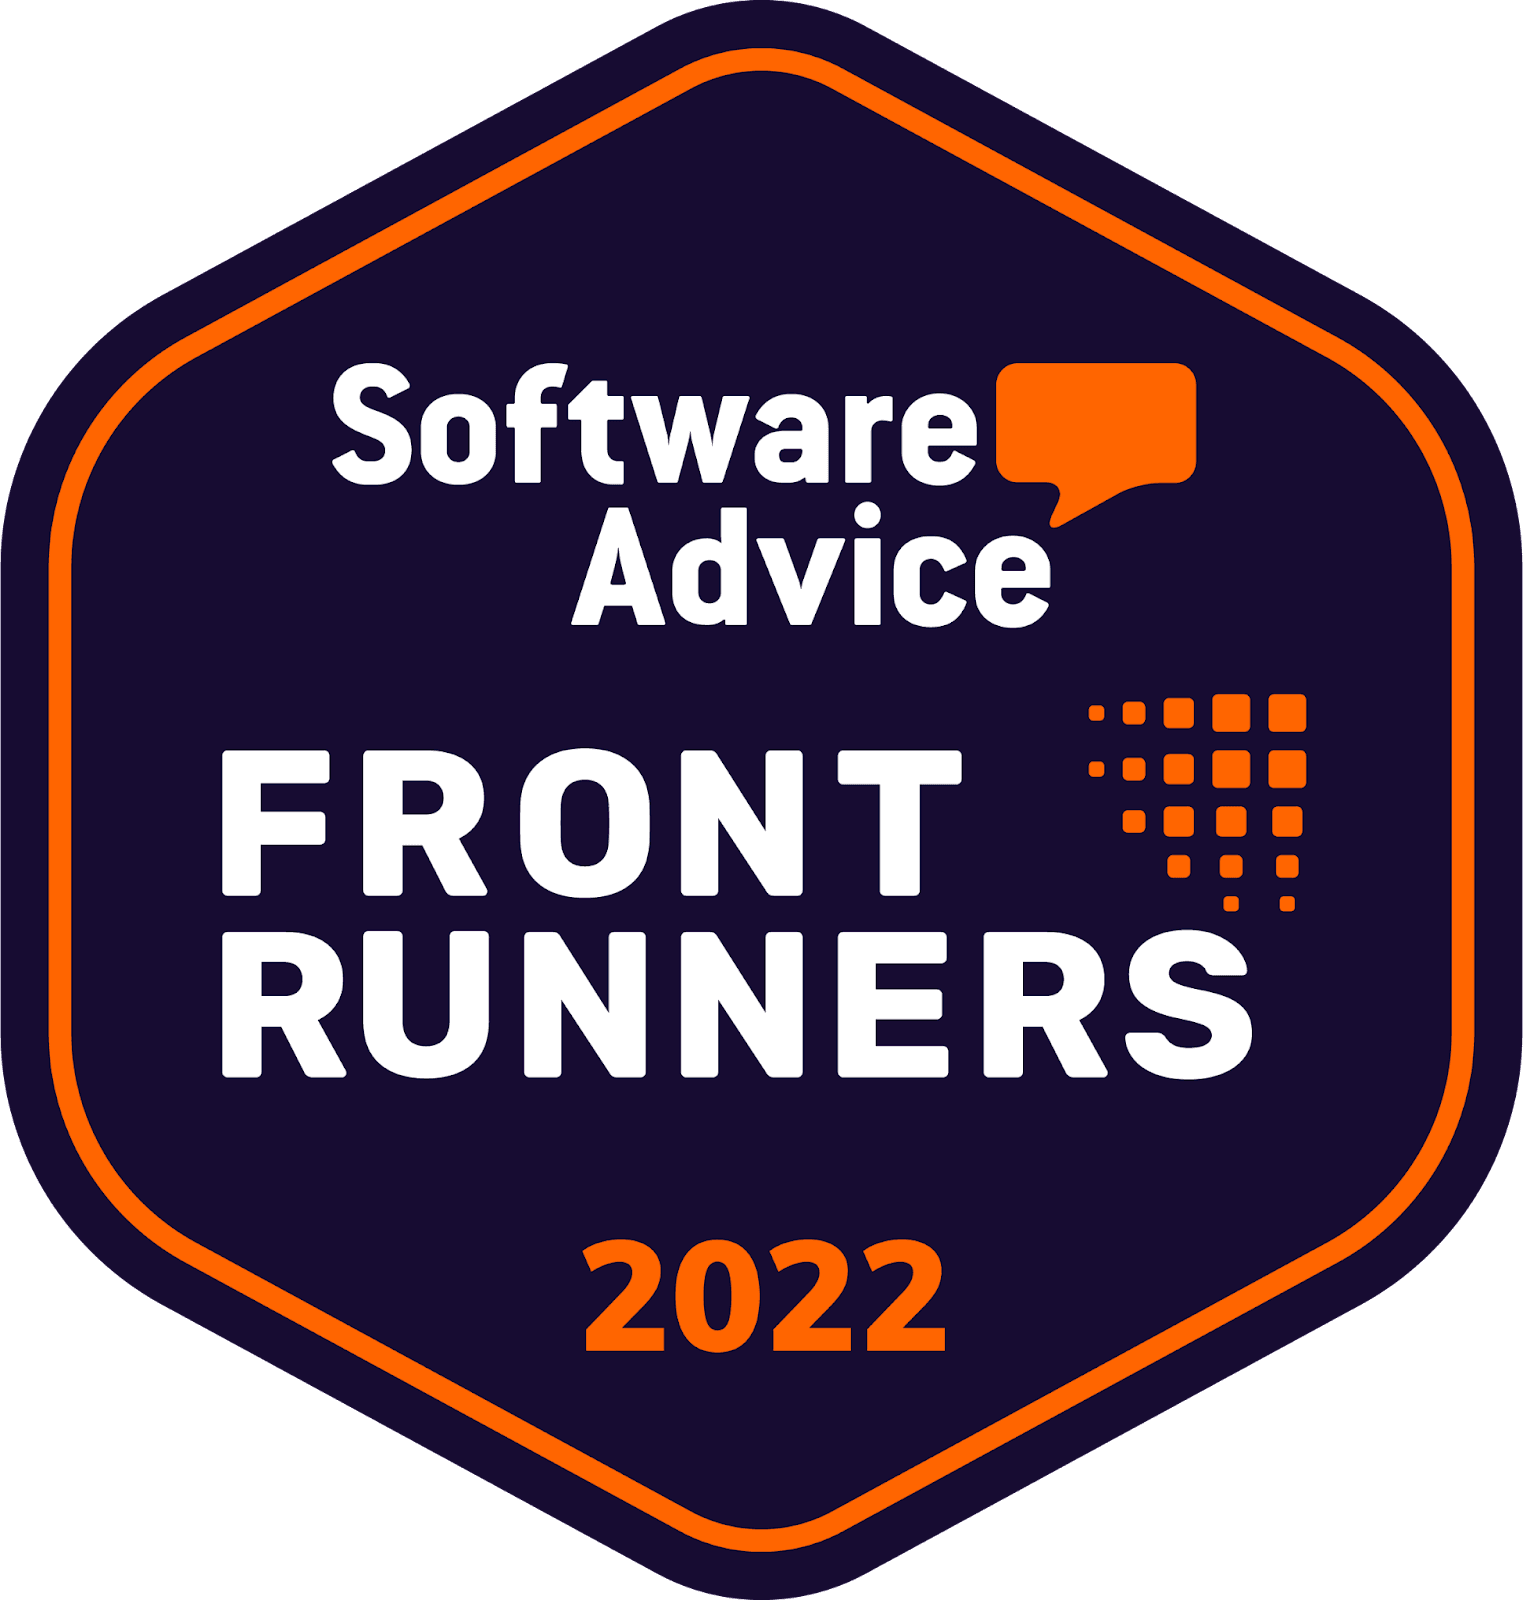 software-advice-frontrunners-2022.png